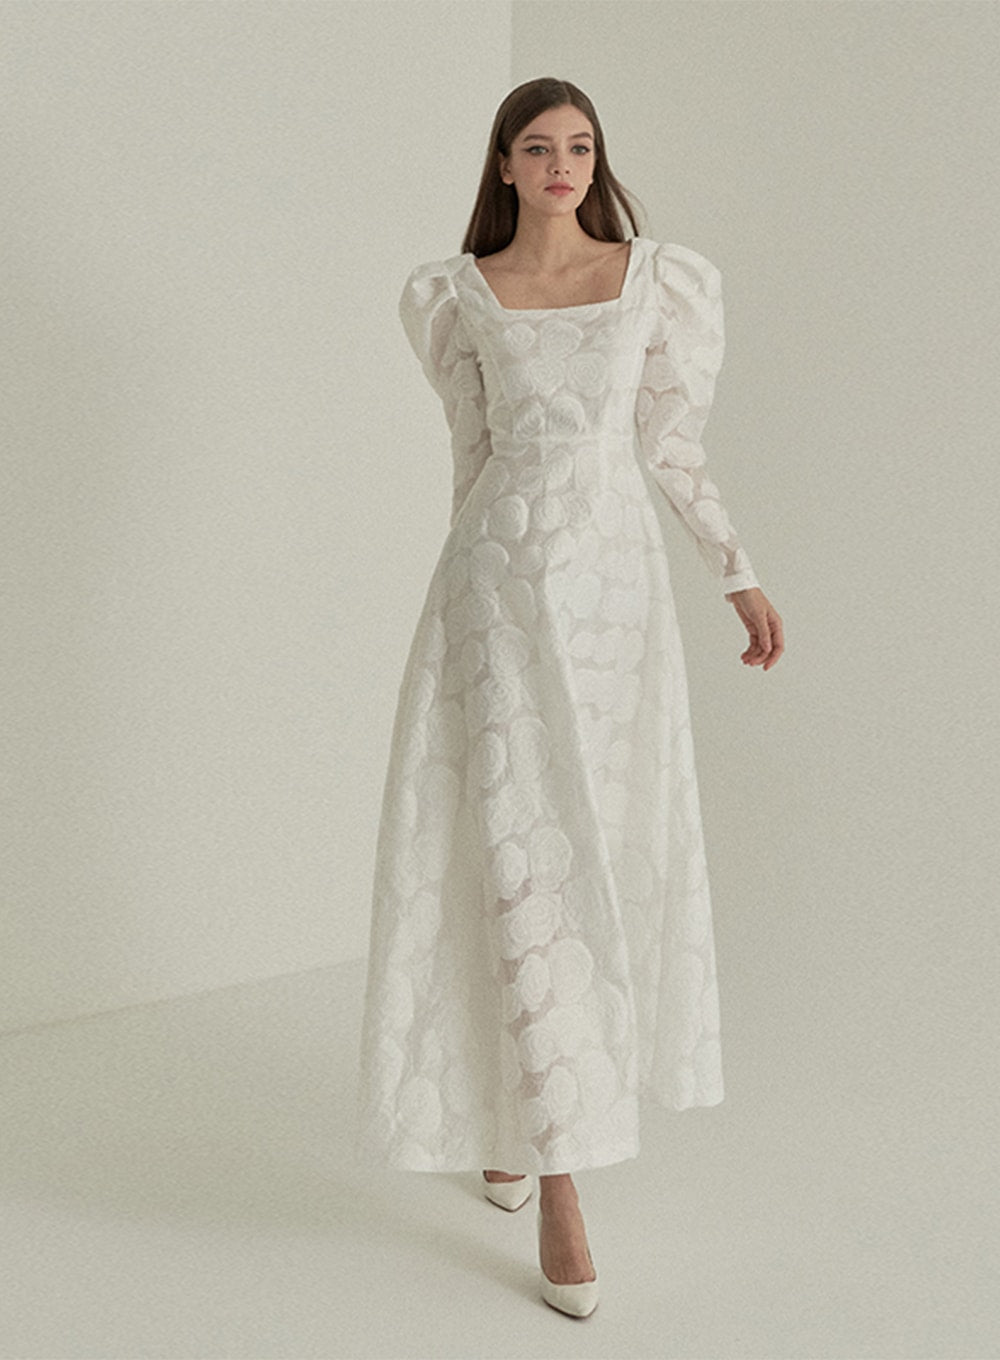 Strapless A-line wedding dress with long puffy sleeves